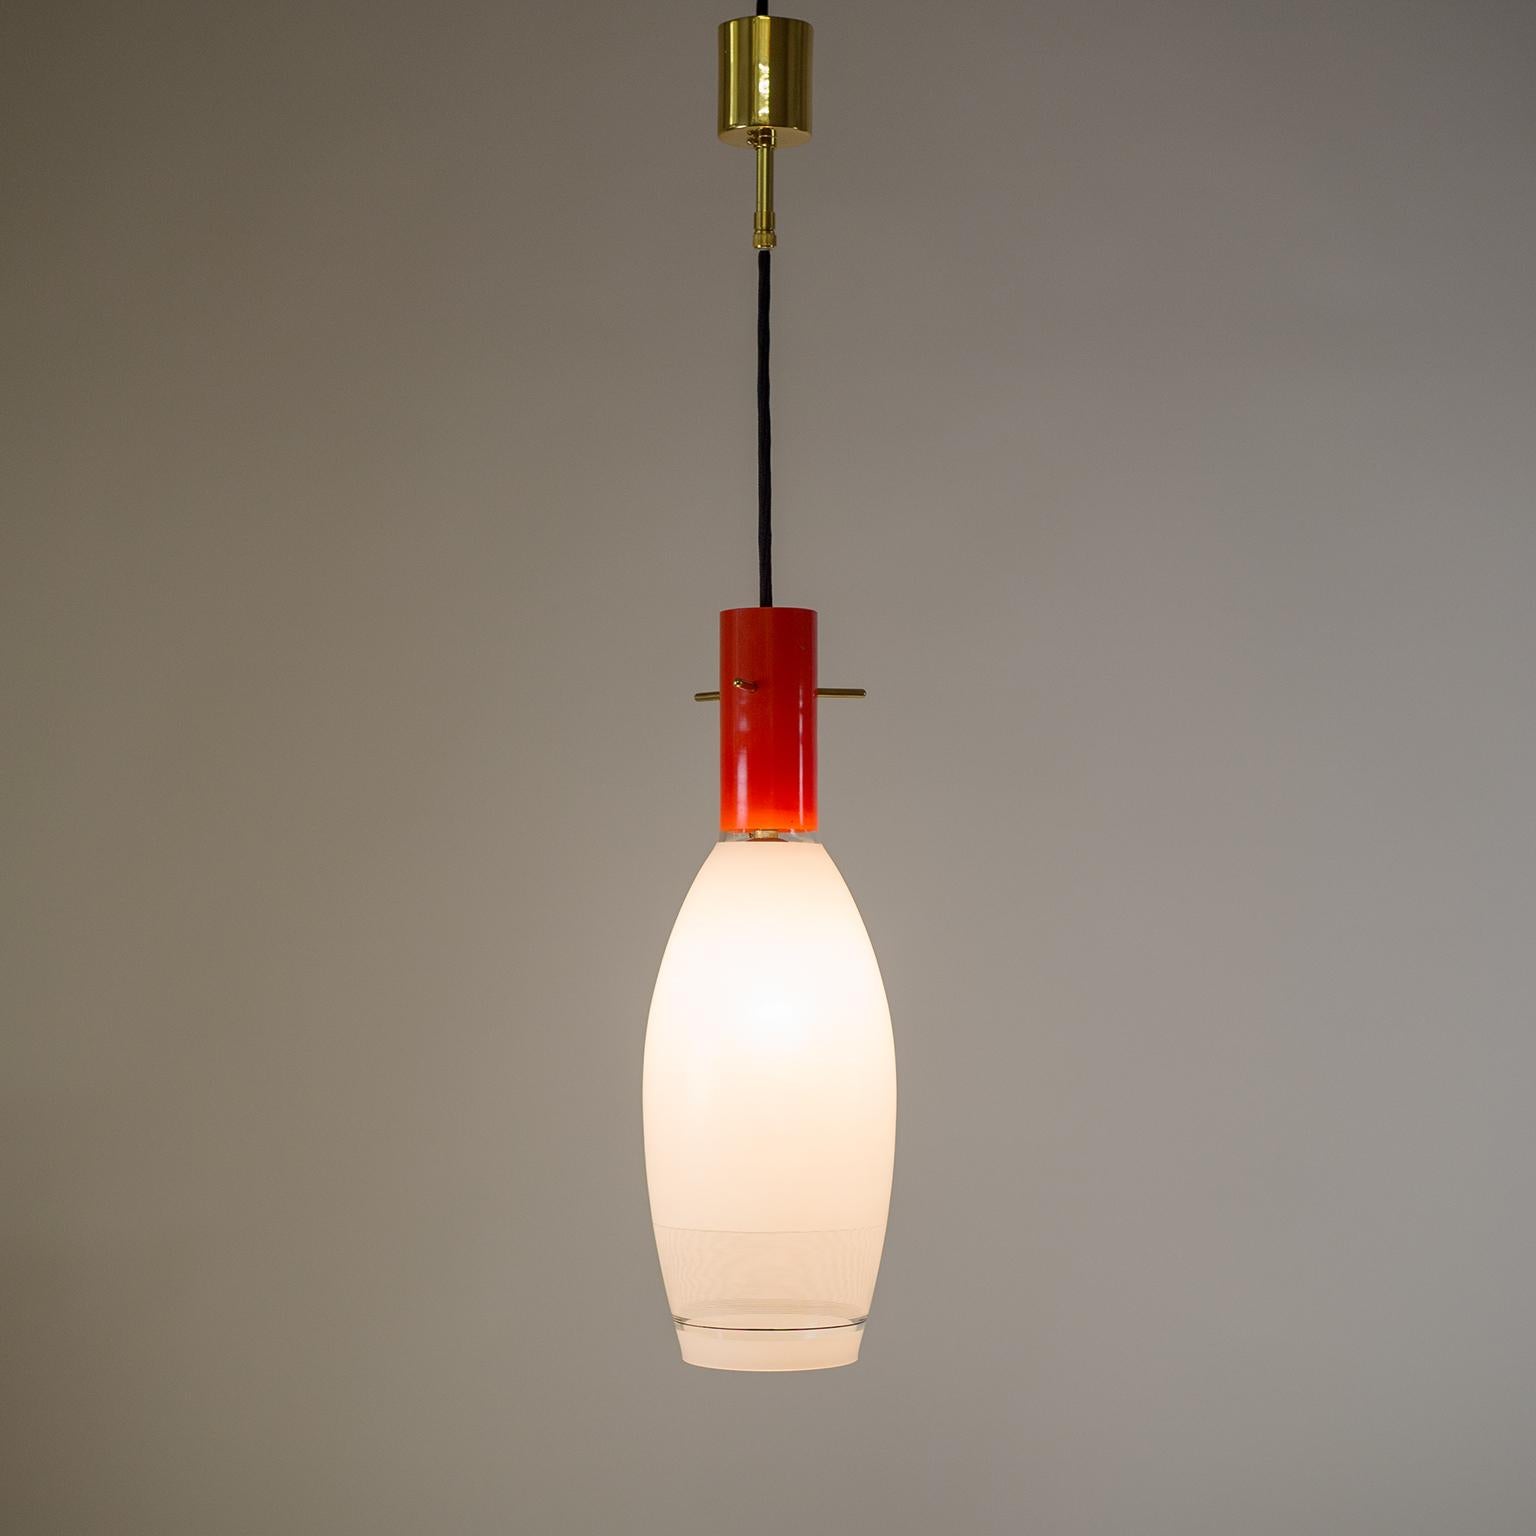 Italian glass pendant with brass details, circa 1960. The blown glass body is enameled in solid red and white, with black and white pinstripe decor on the lower half. Brass parts have been repolished and varnished. One original brass and ceramic E27